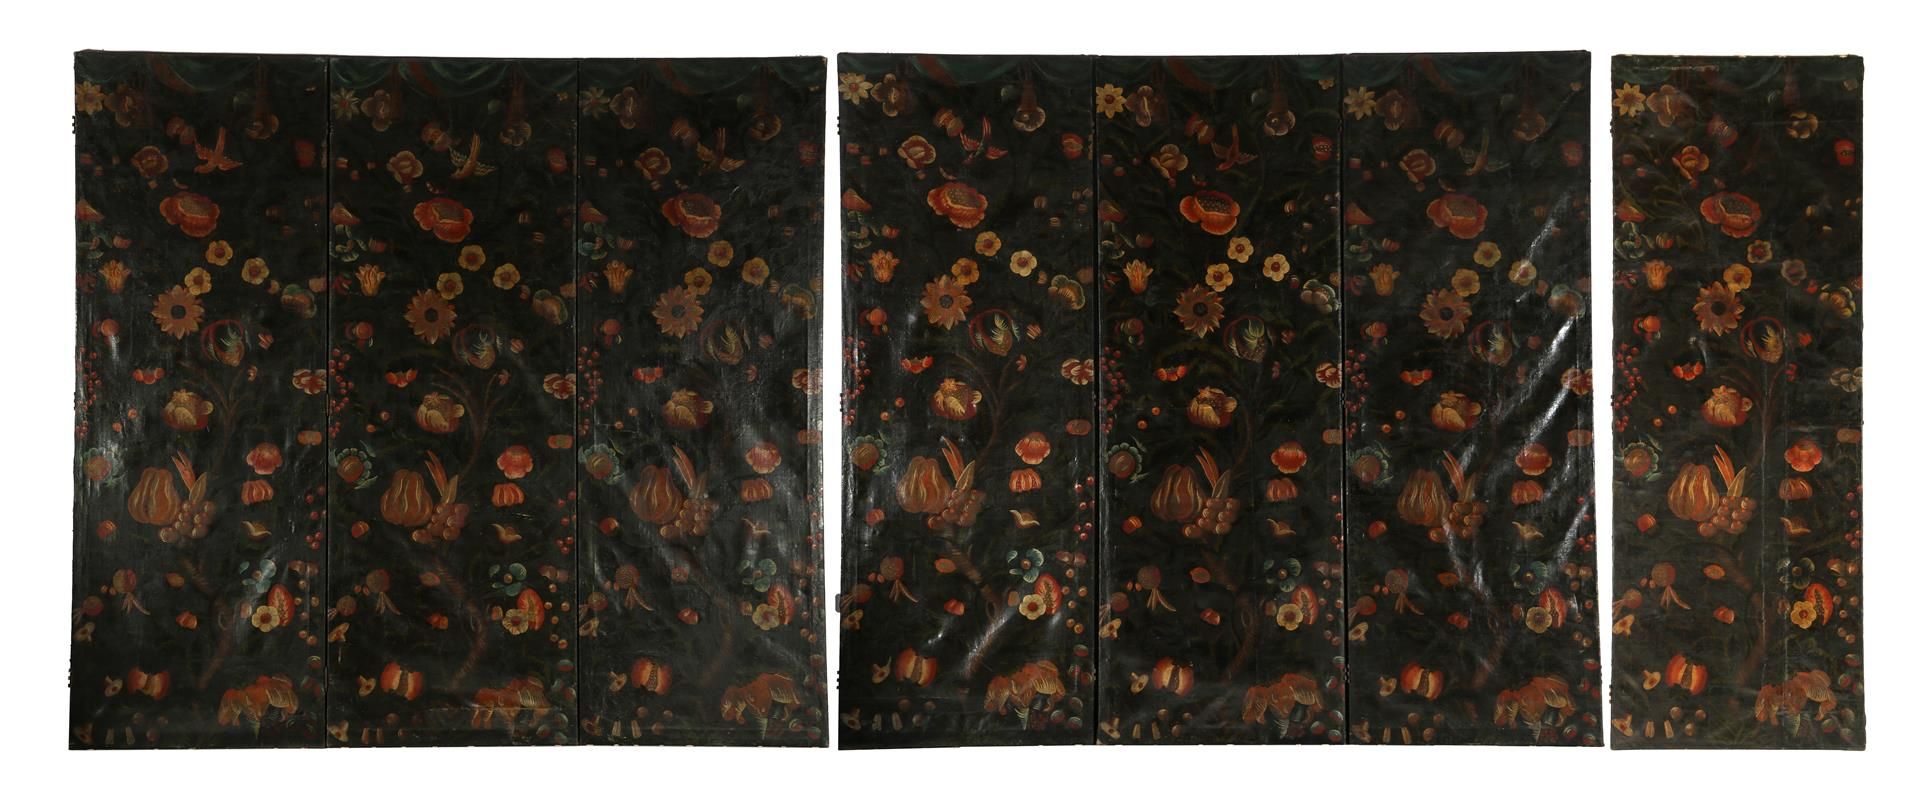 7-piece decorative screen consisting of painted linen with floral decor with birds